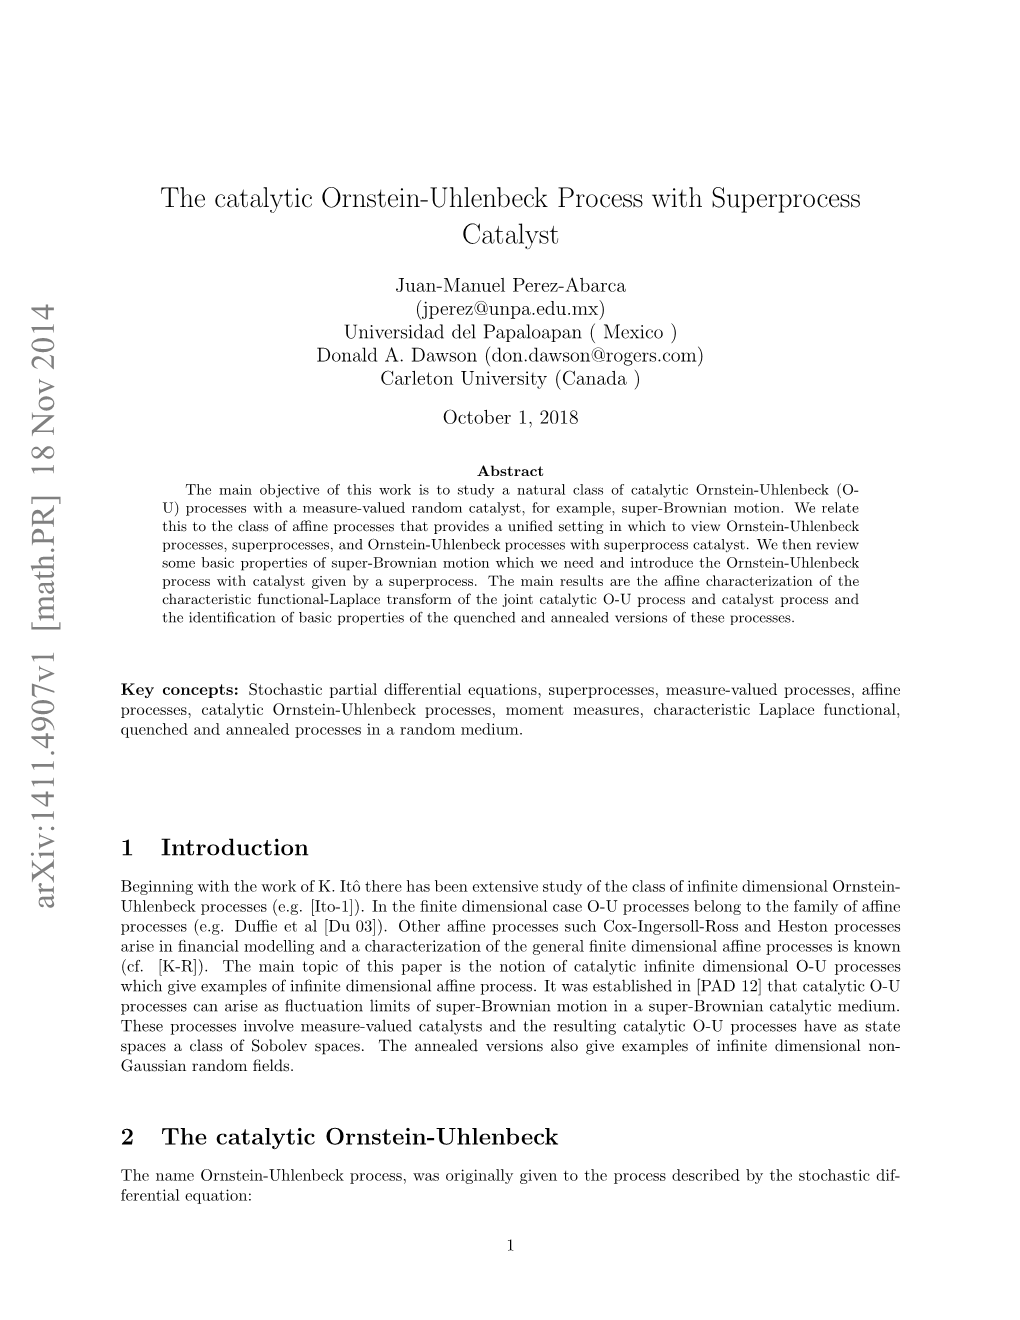 The Catalytic Ornstein-Uhlenbeck Process with Superprocess Catalyst